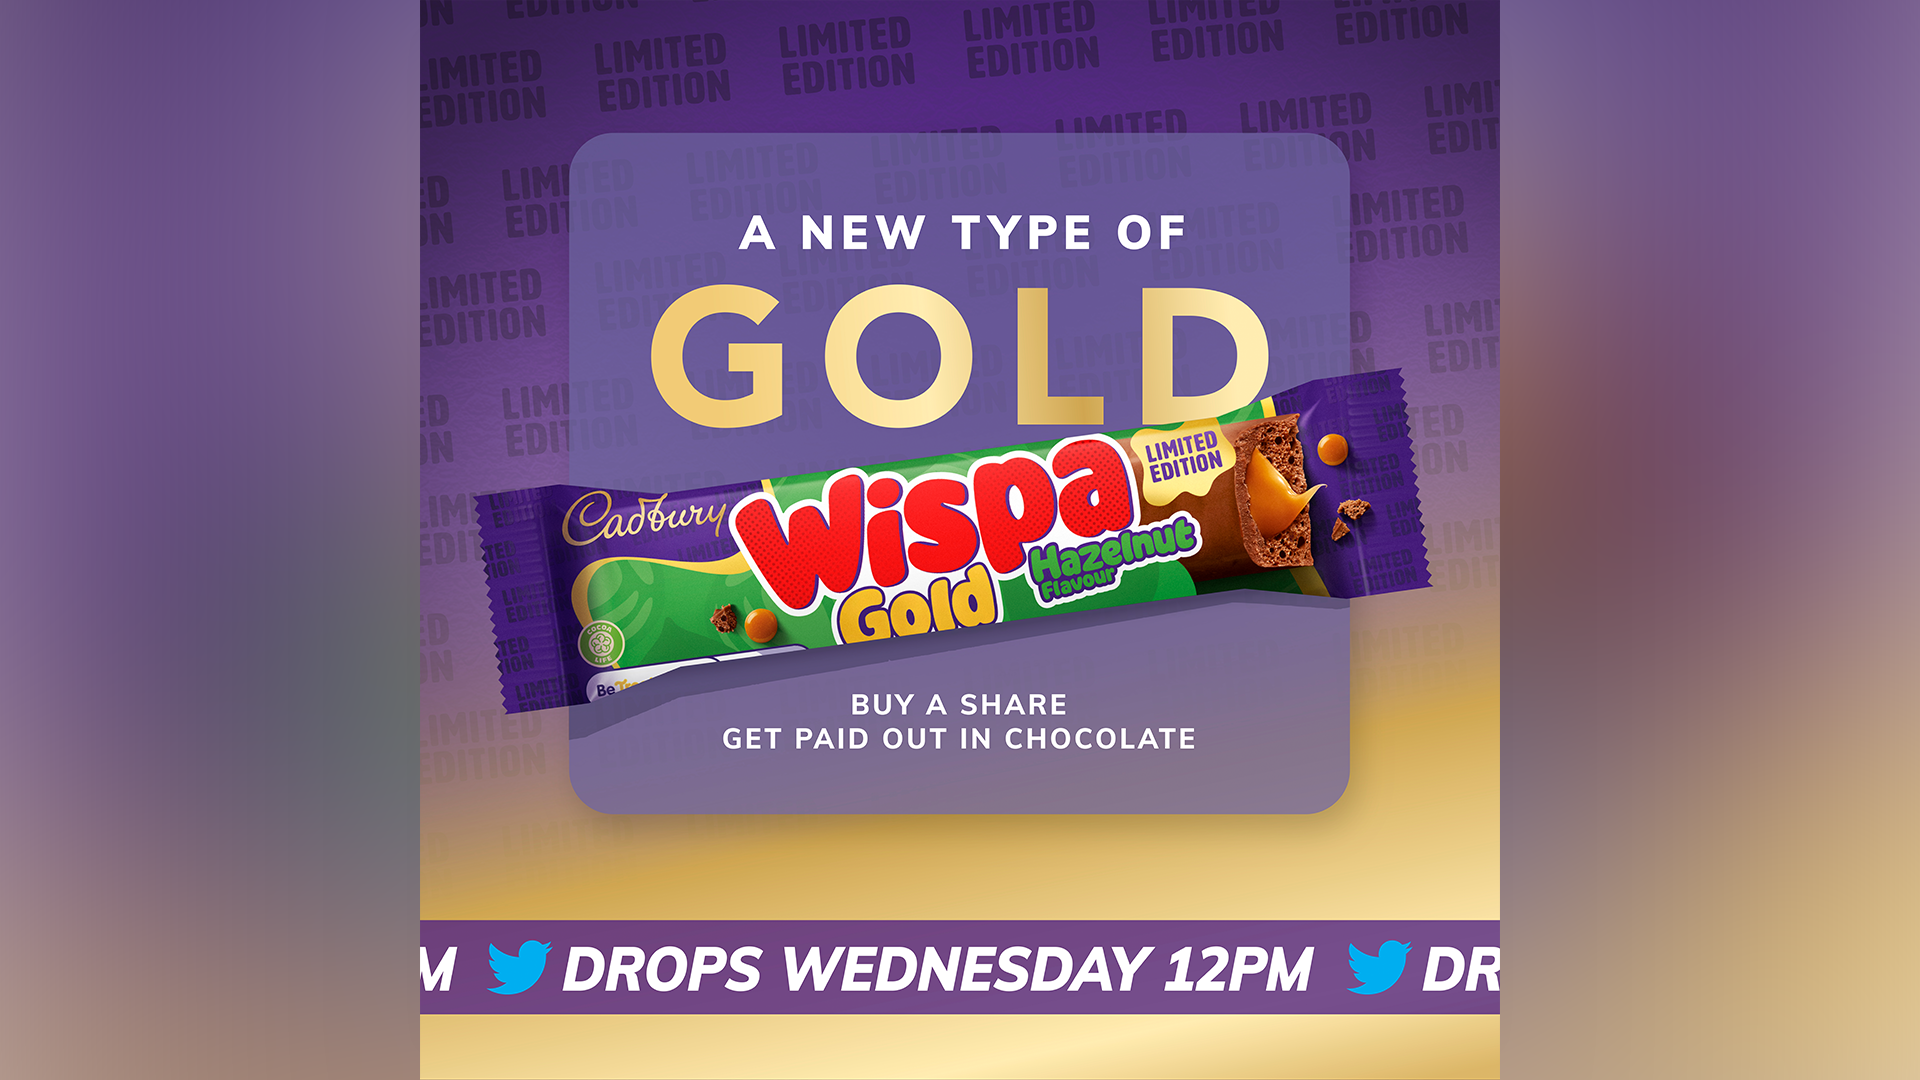 Cadbury reintroduces Wispa Gold with user-generated ad campaign by Fallon